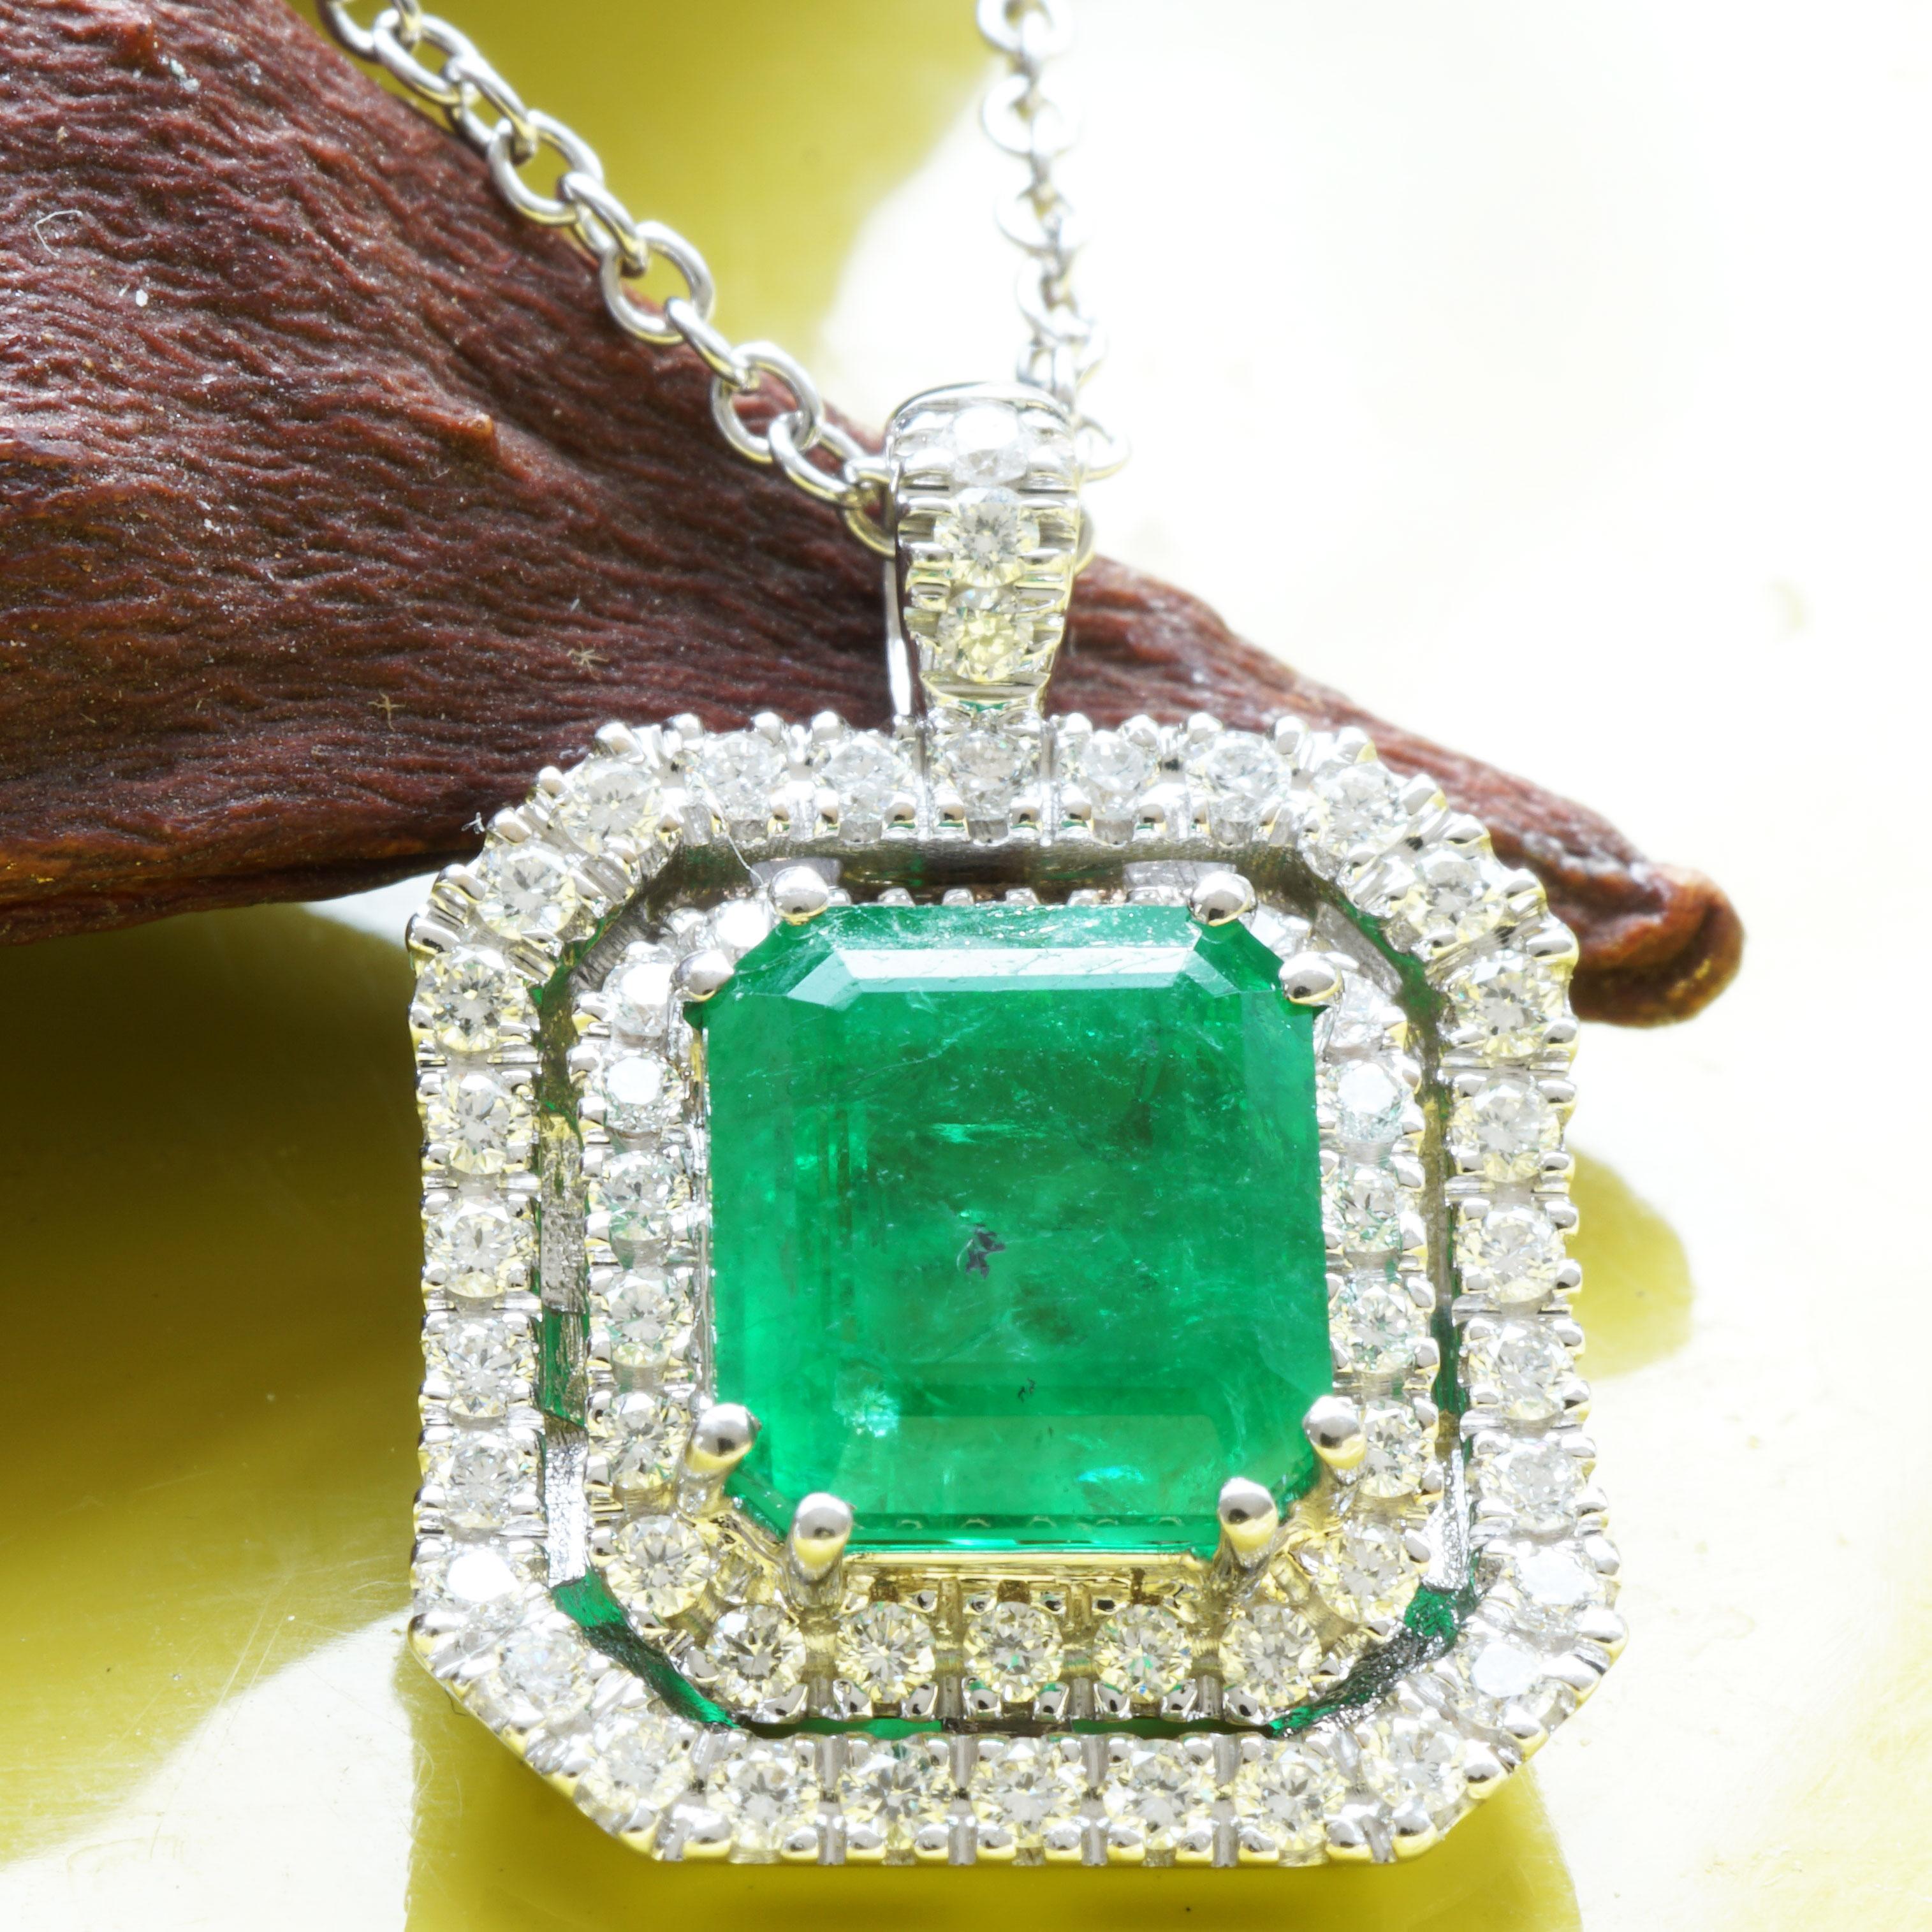 estimated value approx. 9.550,-- euros

real emeralds make you happy, here a noble pendant decorated with diamonds in halo style, a fine emerald (oiled) approx. 2.13 ct, intensive color quality, AAA+, light natural inclusions, step cut, 7.63 x 6.94